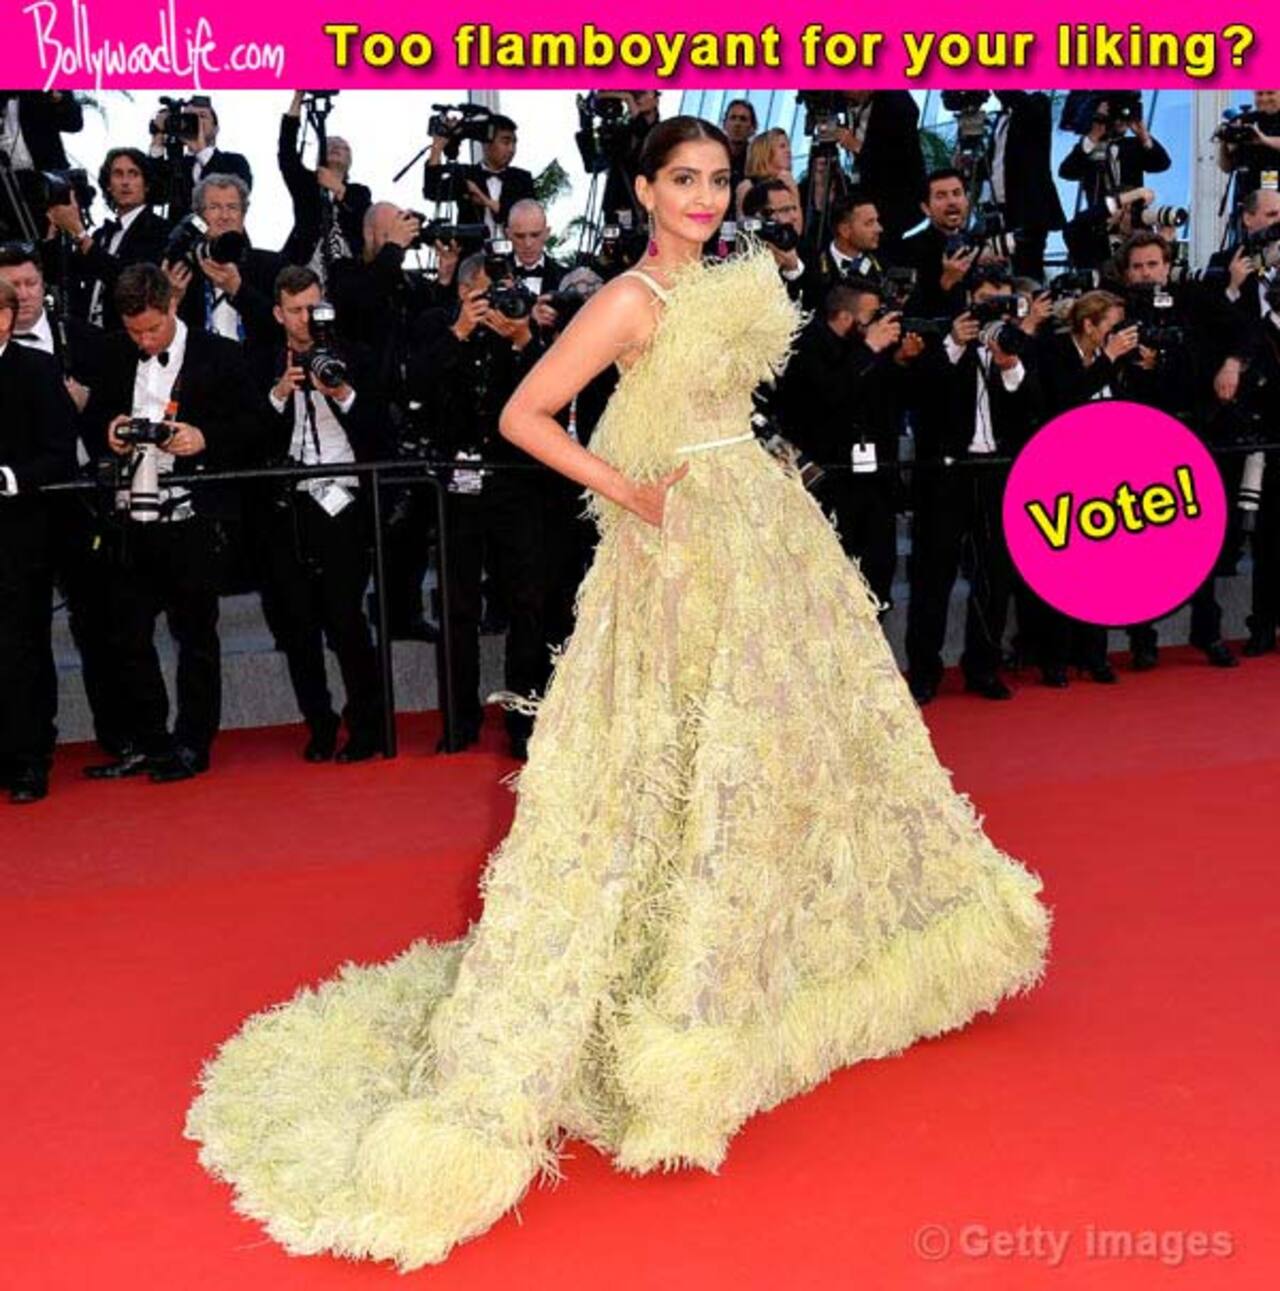 Was Sonam Kapoor's Elie Saab gown too pretentious for the red carpet at Cannes 2015? Vote!